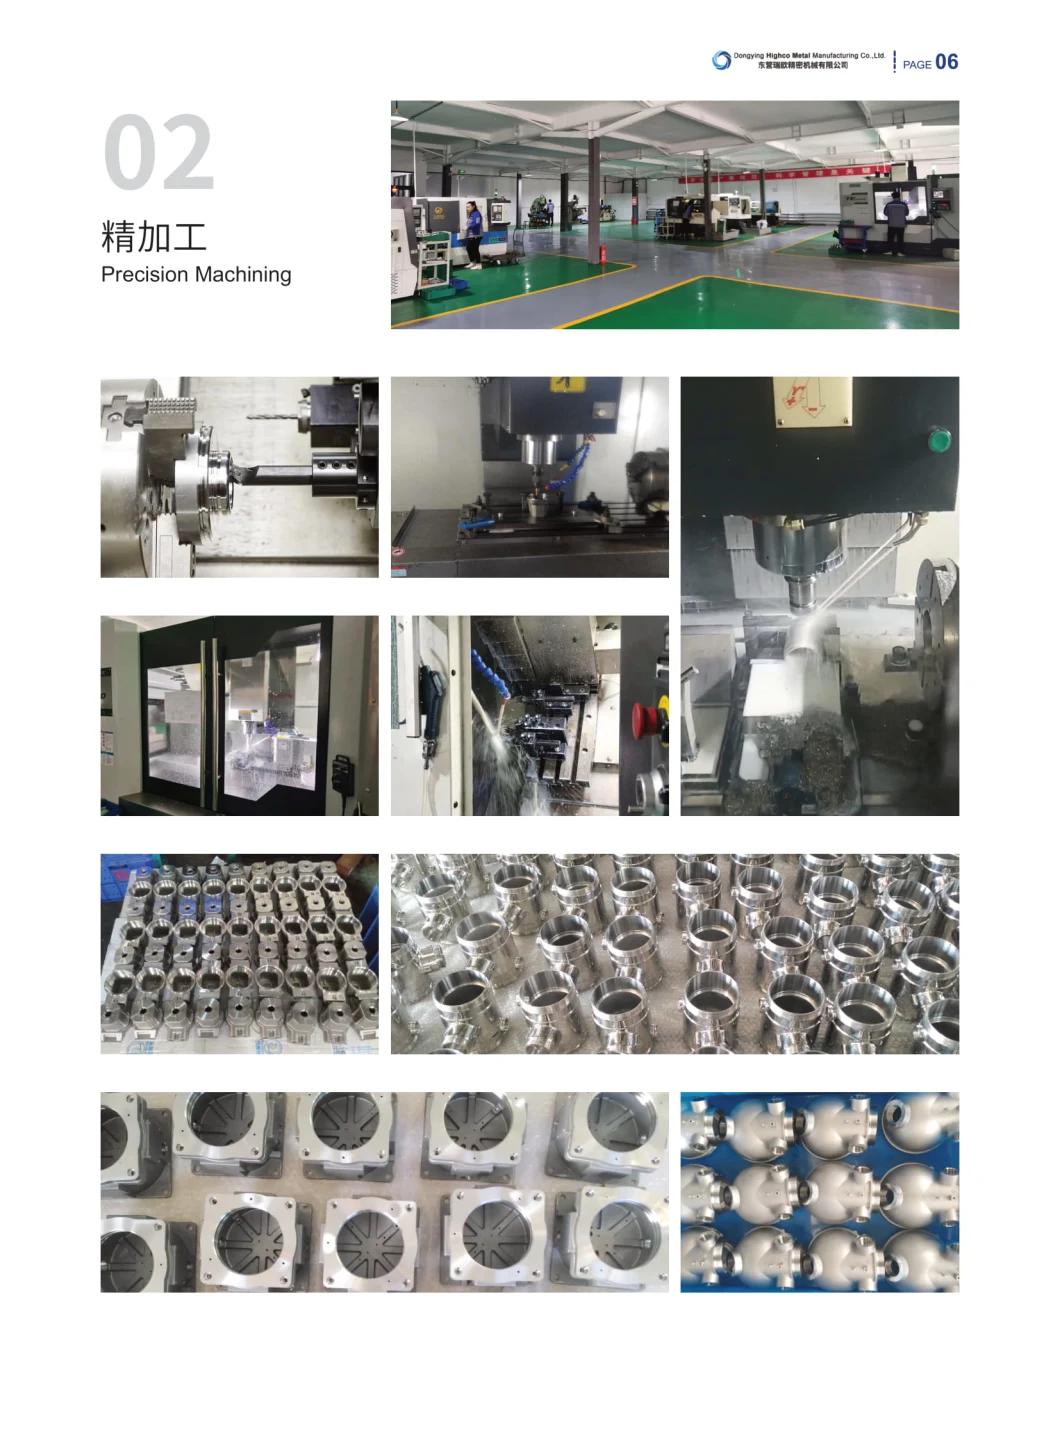 Stainless Steel Casting for Meat Mincer Parts